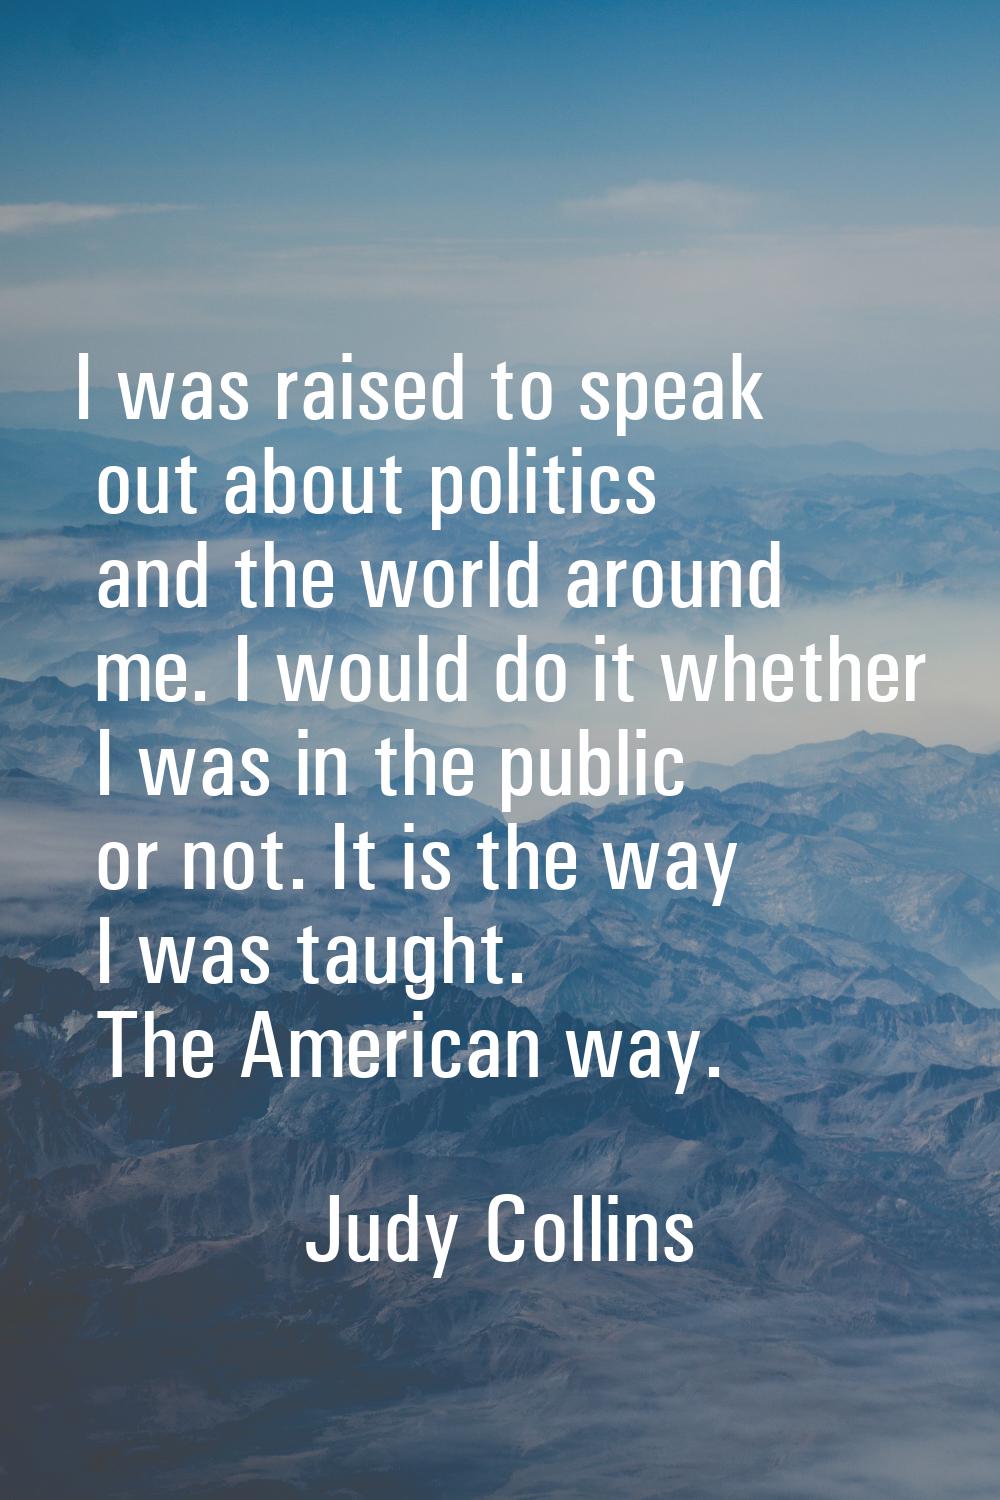 I was raised to speak out about politics and the world around me. I would do it whether I was in th